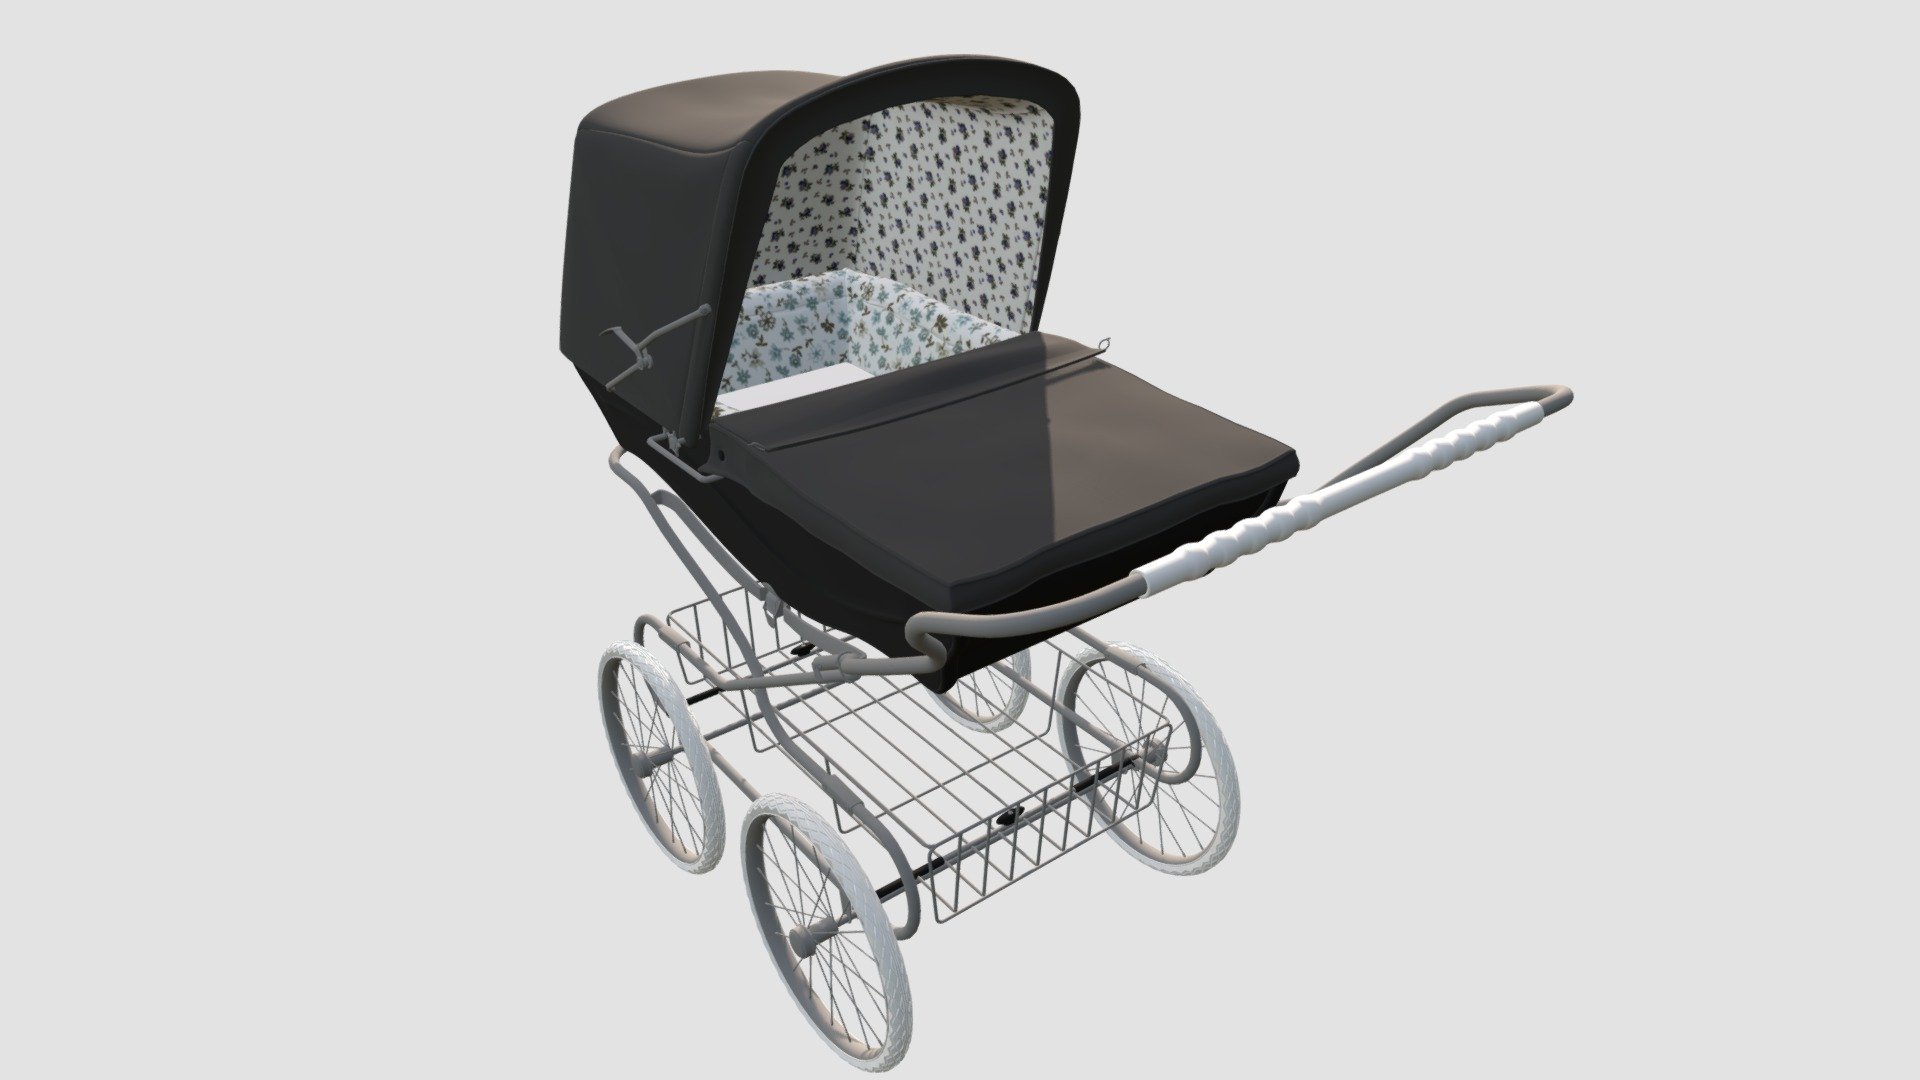 Highly detailed 3d model of stroller with all textures, shaders and materials. It is ready to use, just put it into your scene 3d model